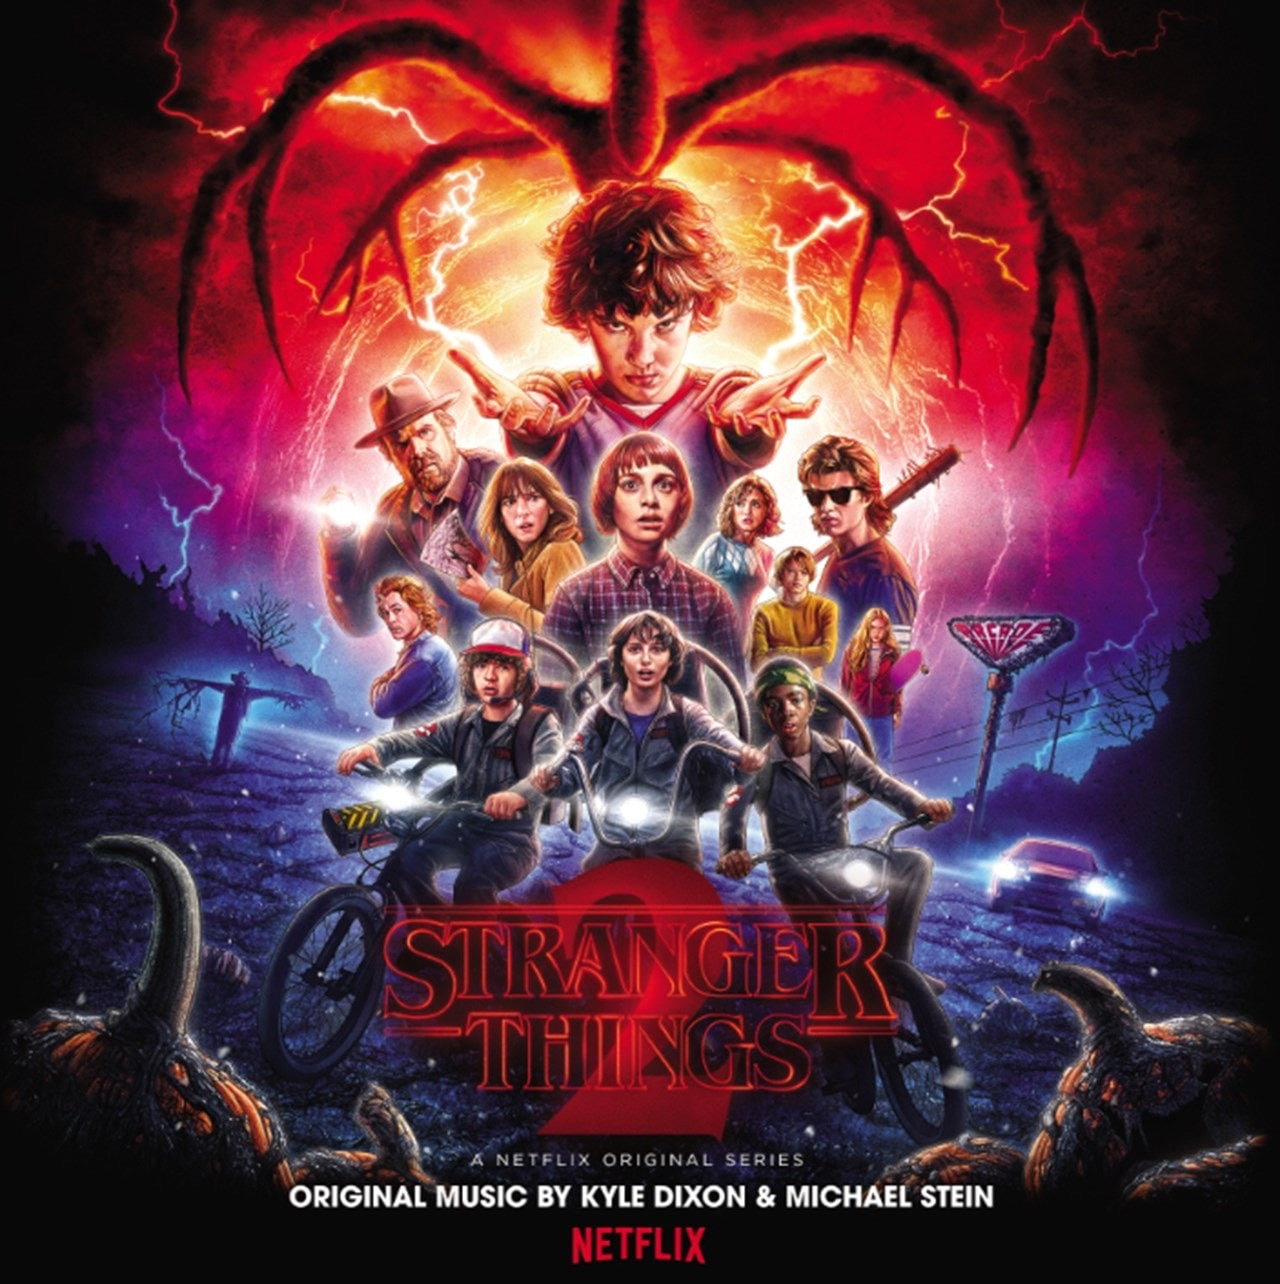 OST: Stranger Things 2 - Music By Kyle Dixon & Michael Stein